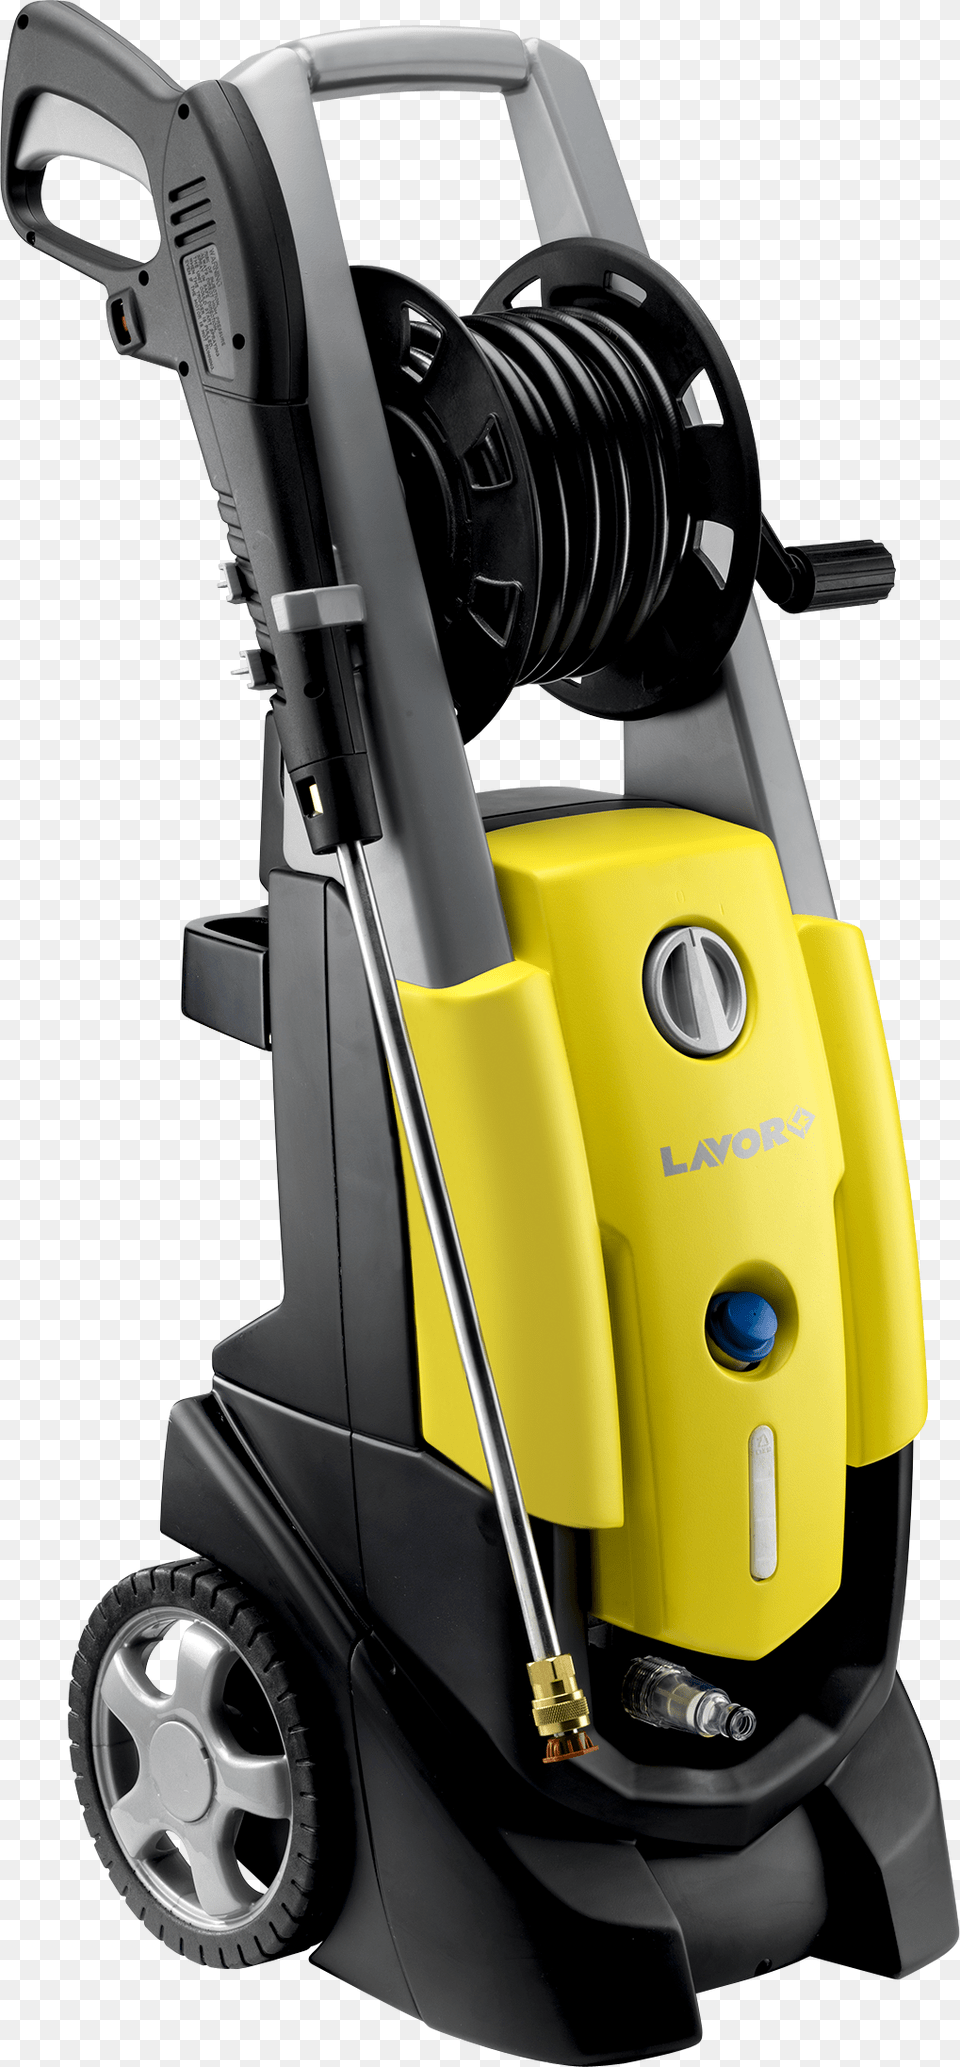 Giant 28 Lavor Pressure Washer, Wheel, Device, Machine, Appliance Png